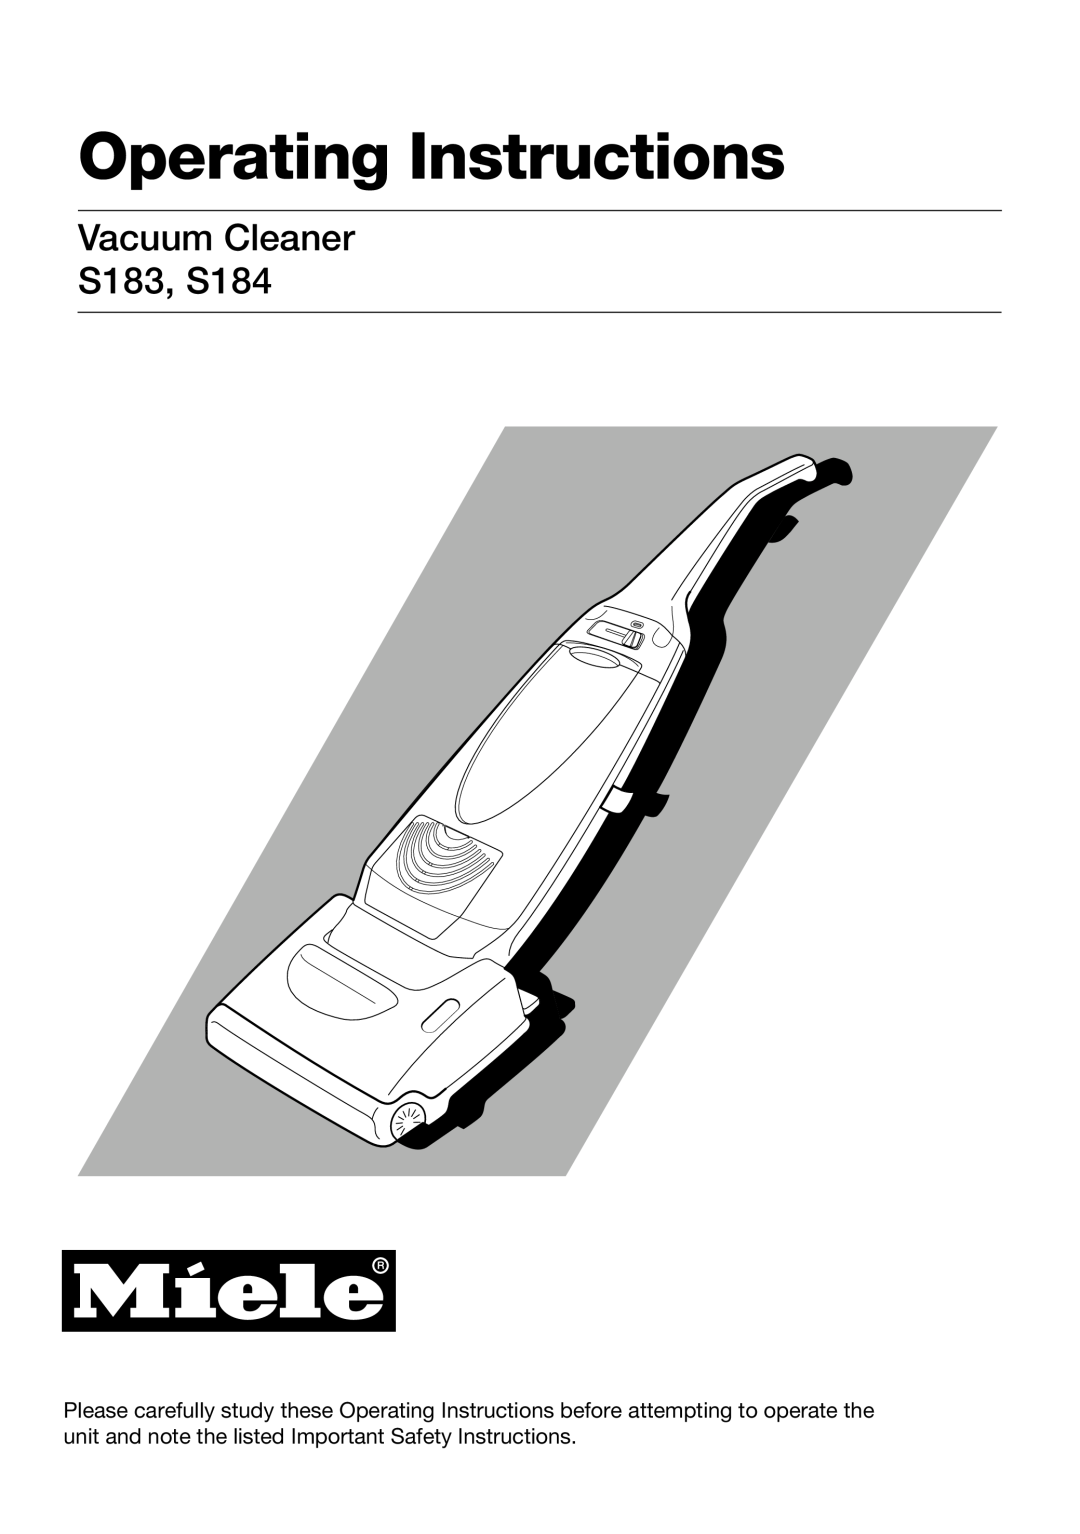 Miele important safety instructions Operating Instructions, Vacuum Cleaner S183, S184 